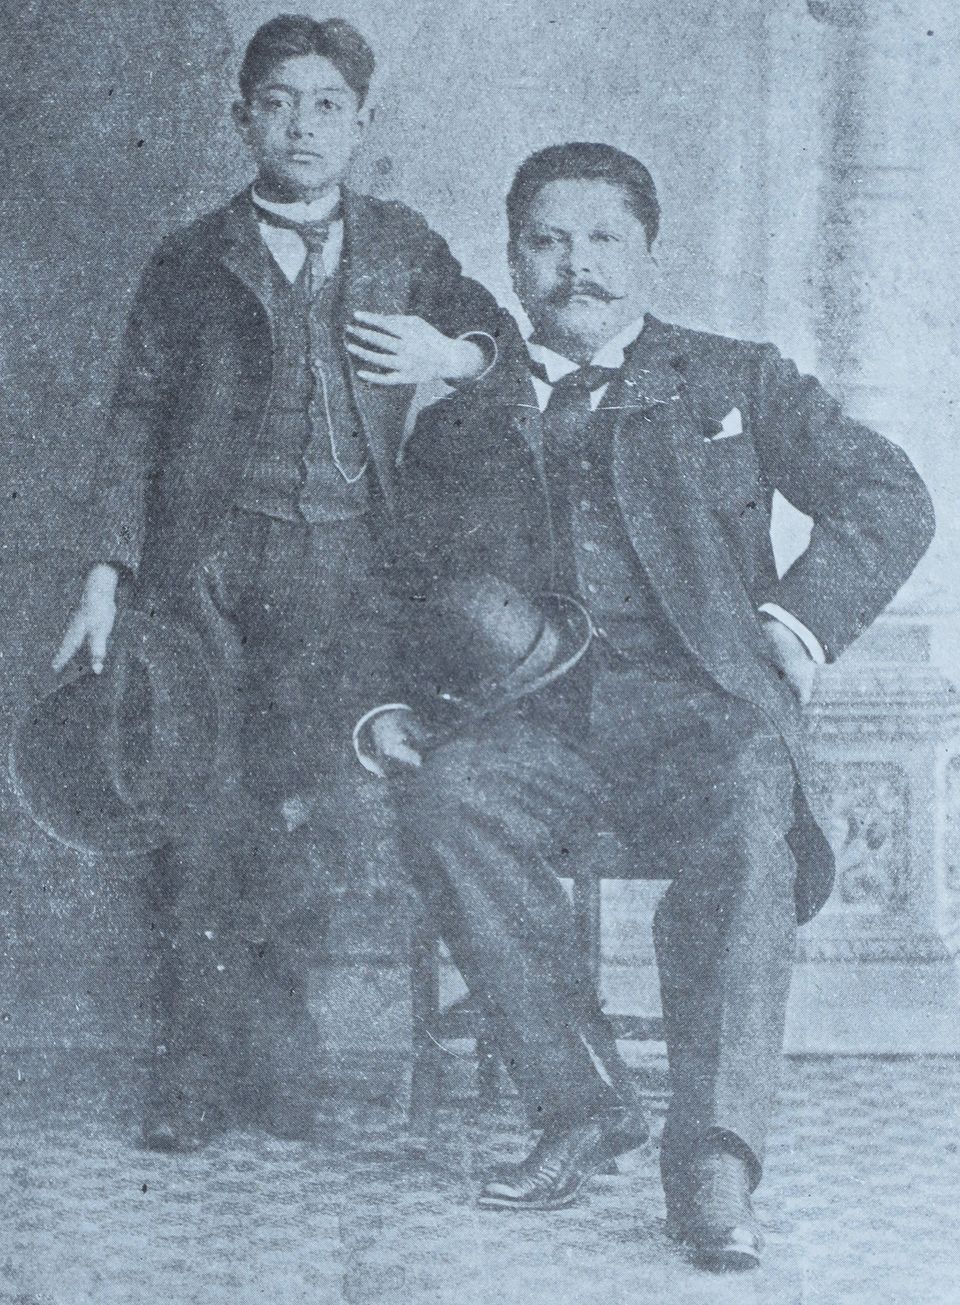 A photograph of two men